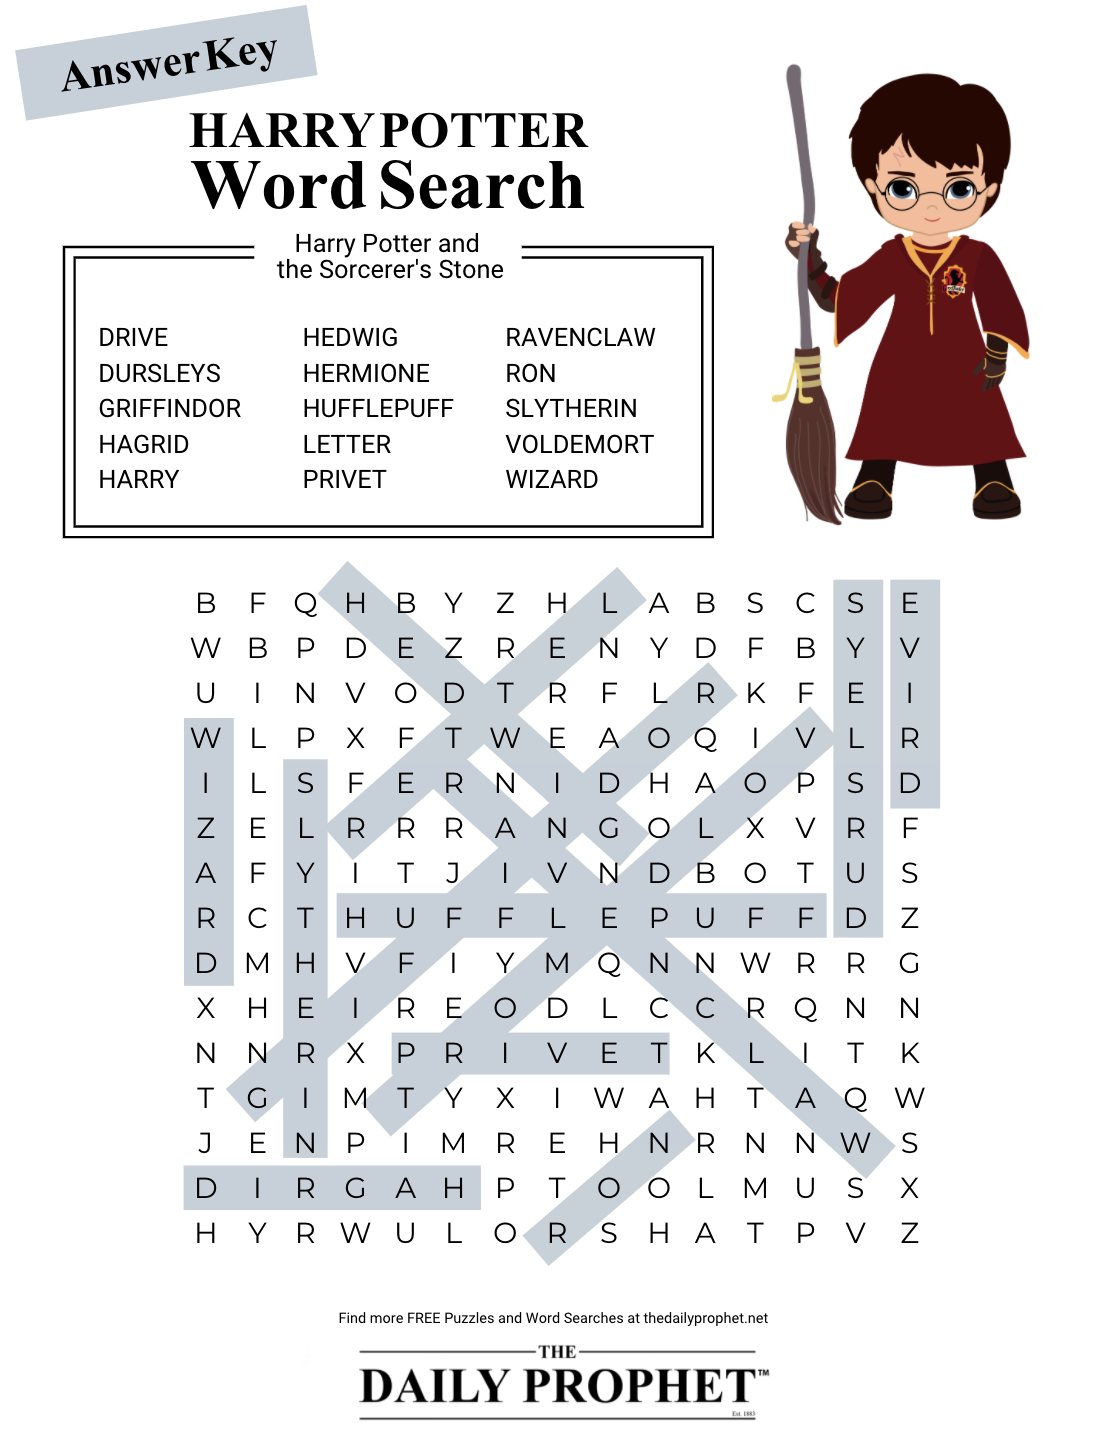 Harry Potter Word Search Answer Key